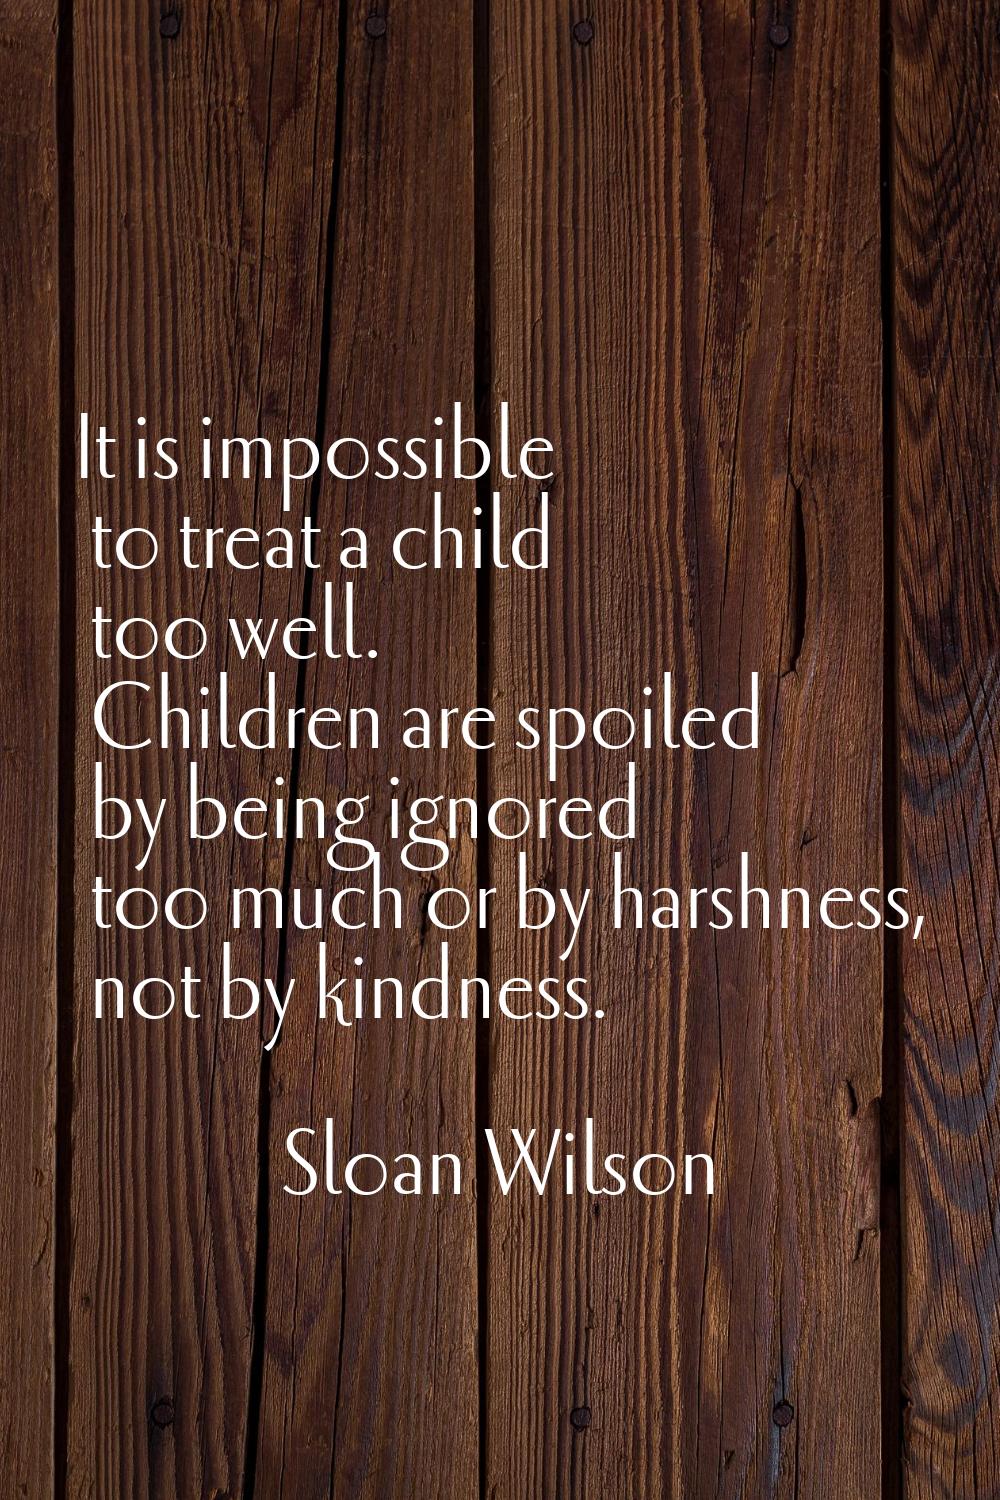 It is impossible to treat a child too well. Children are spoiled by being ignored too much or by ha